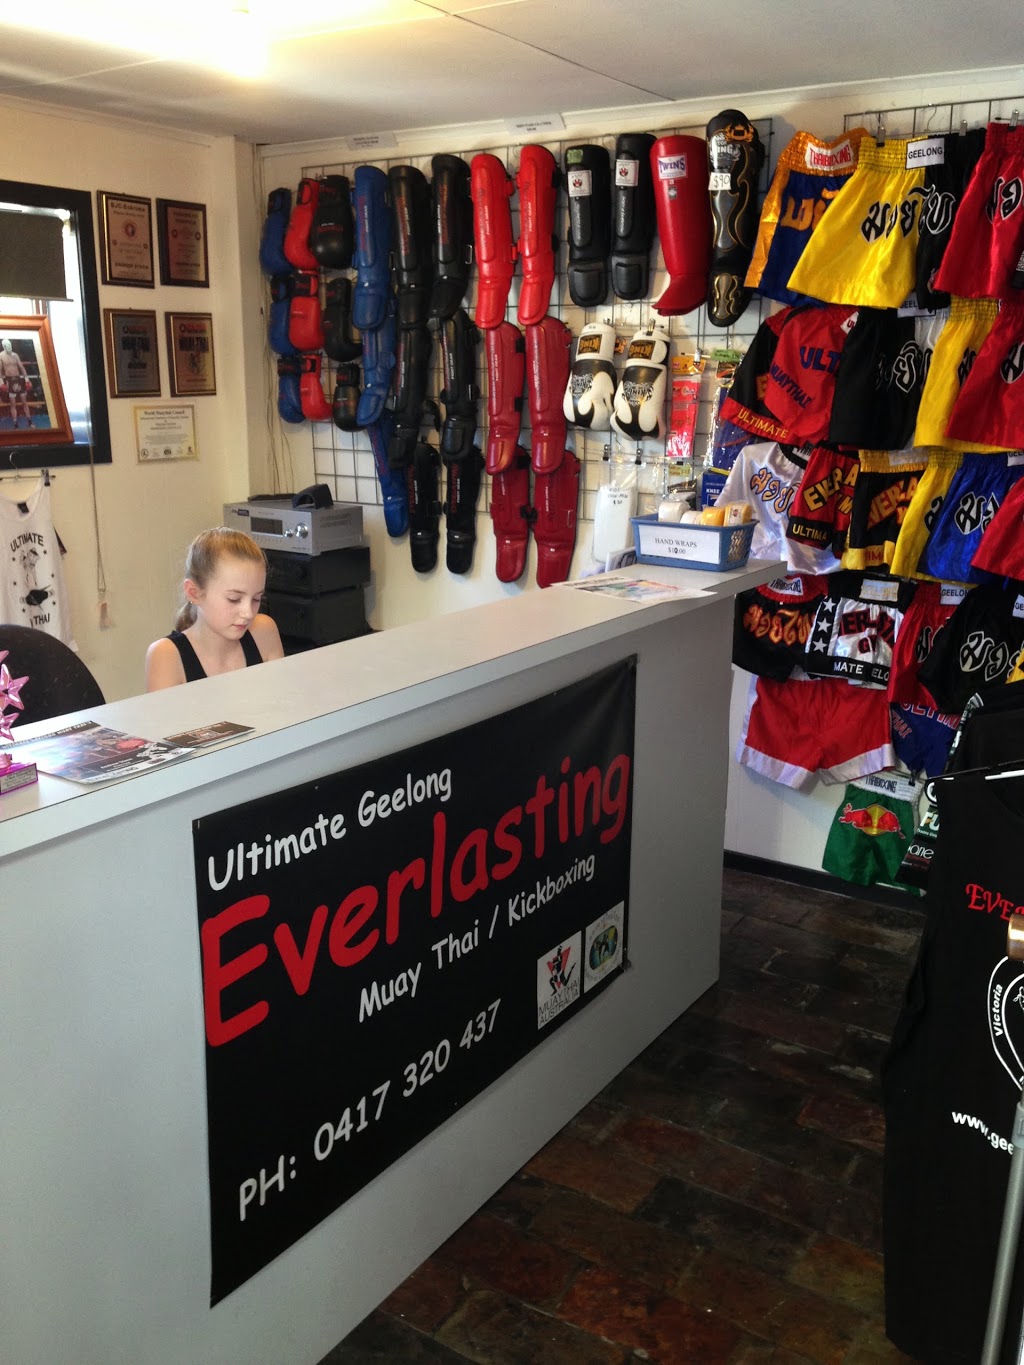 Ultimate Geelong Muay Thai - Everlasting Gym | gym | 1 Victoria St, South Geelong VIC 3220, Australia | 0417320437 OR +61 417 320 437